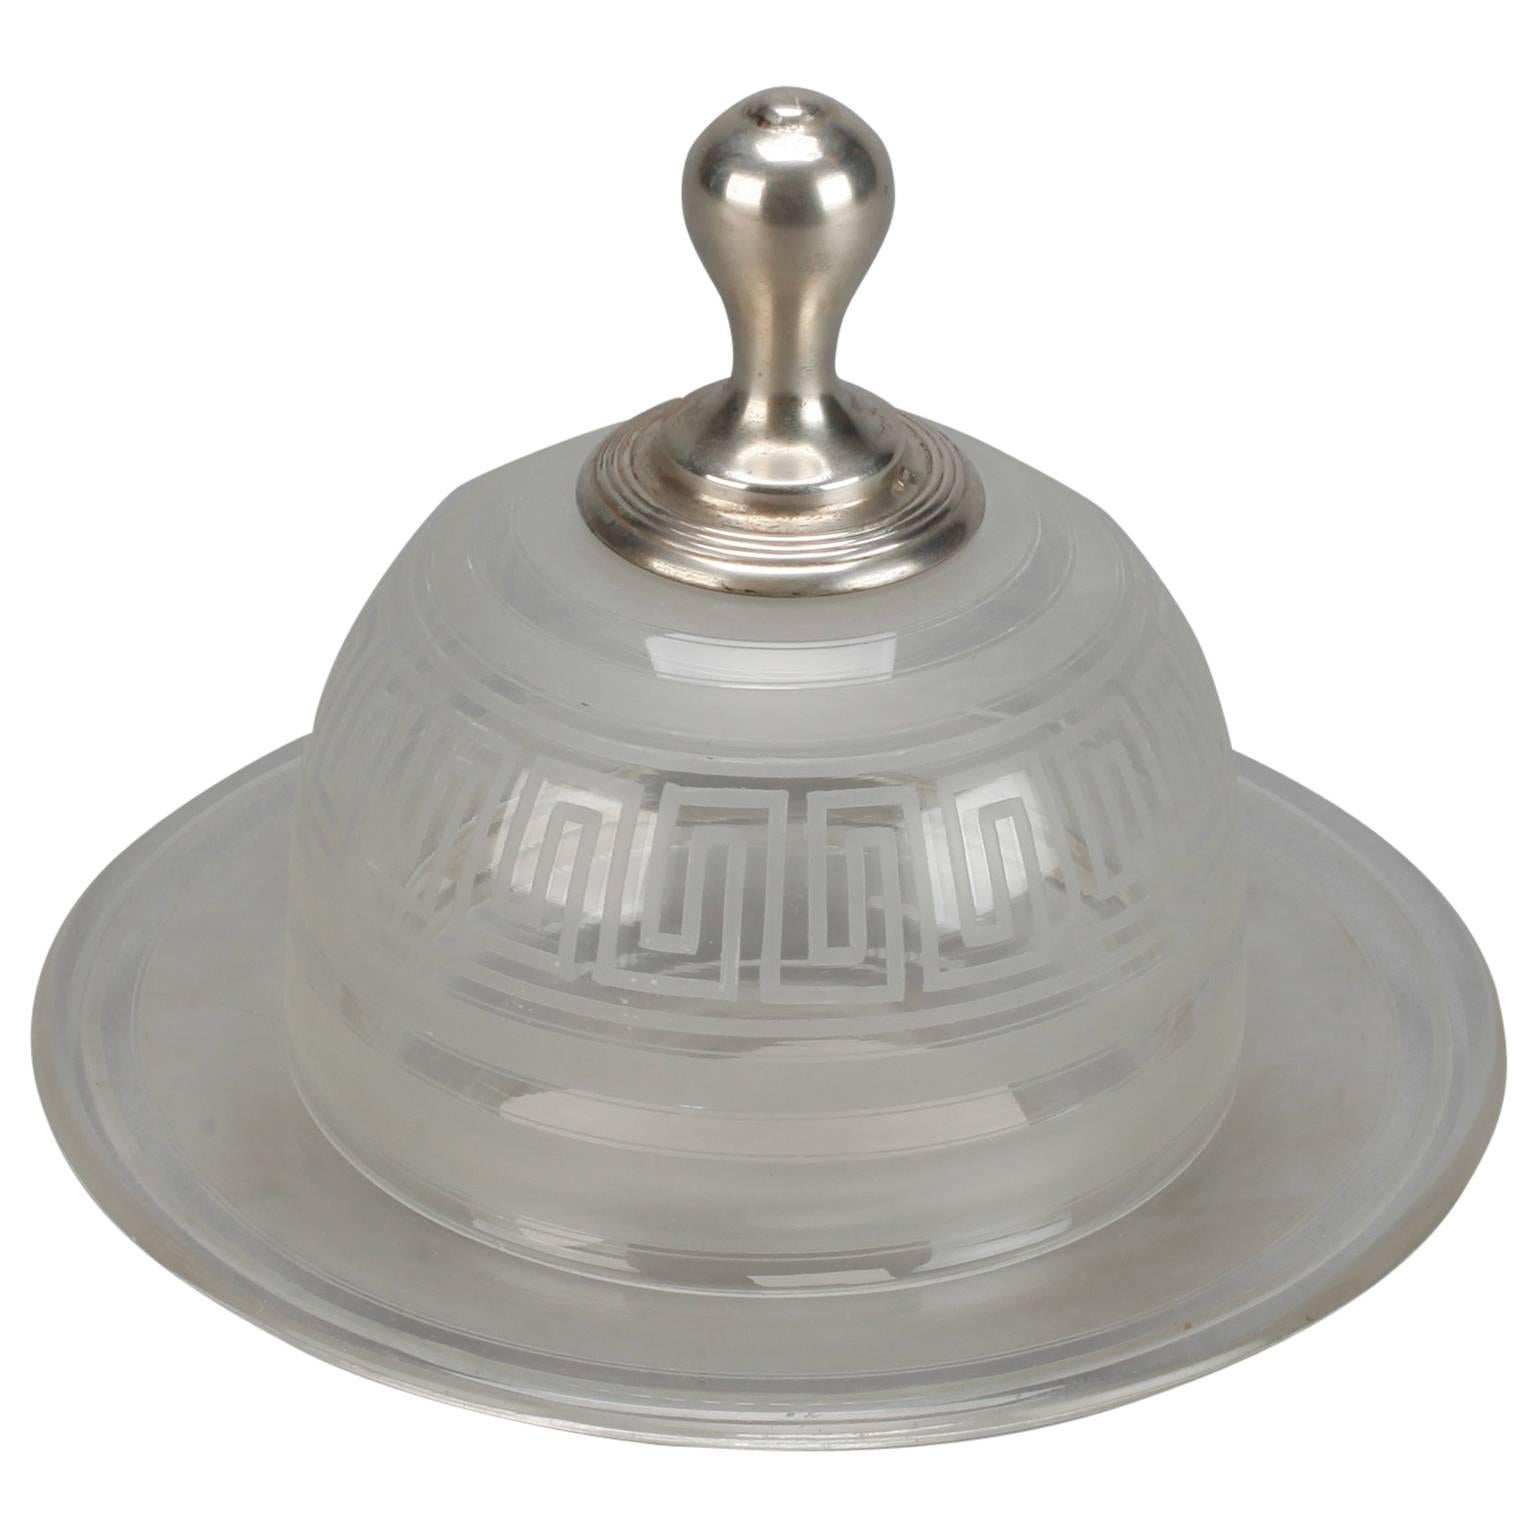 Etched Glass Domed Plate with Greek Key Border and Sterling Knob For Sale